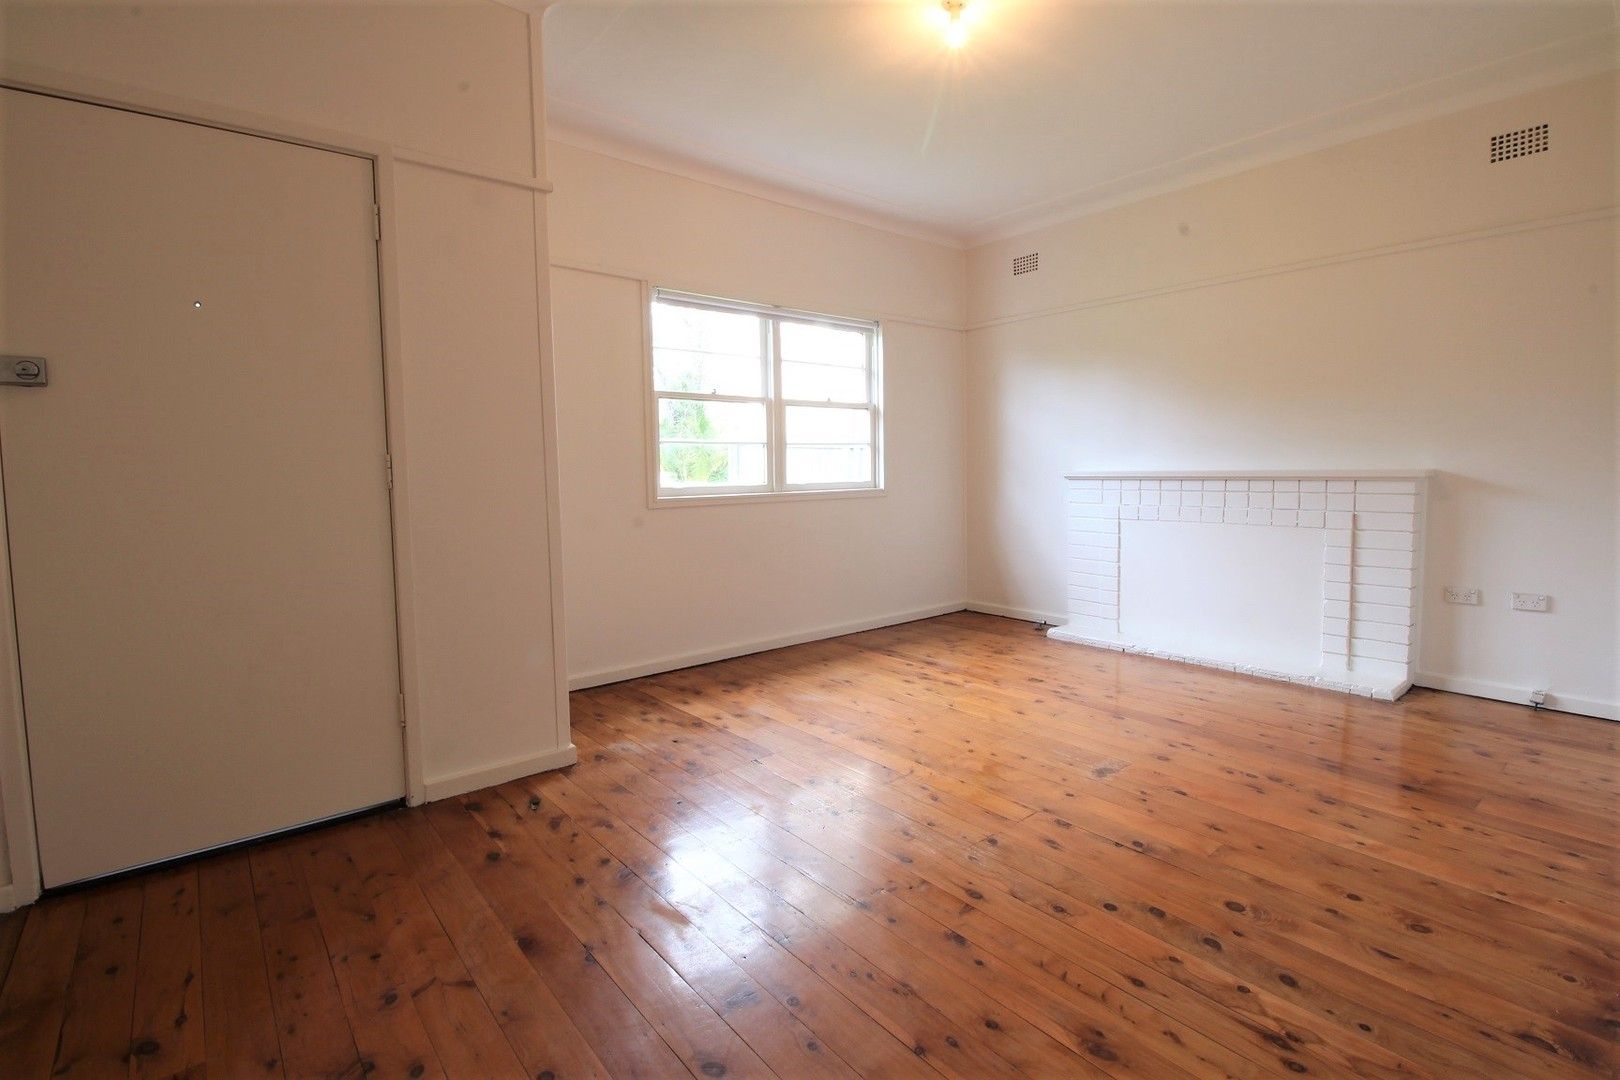 3 bedrooms House in 6 Murray Street NORTH PARRAMATTA NSW, 2151